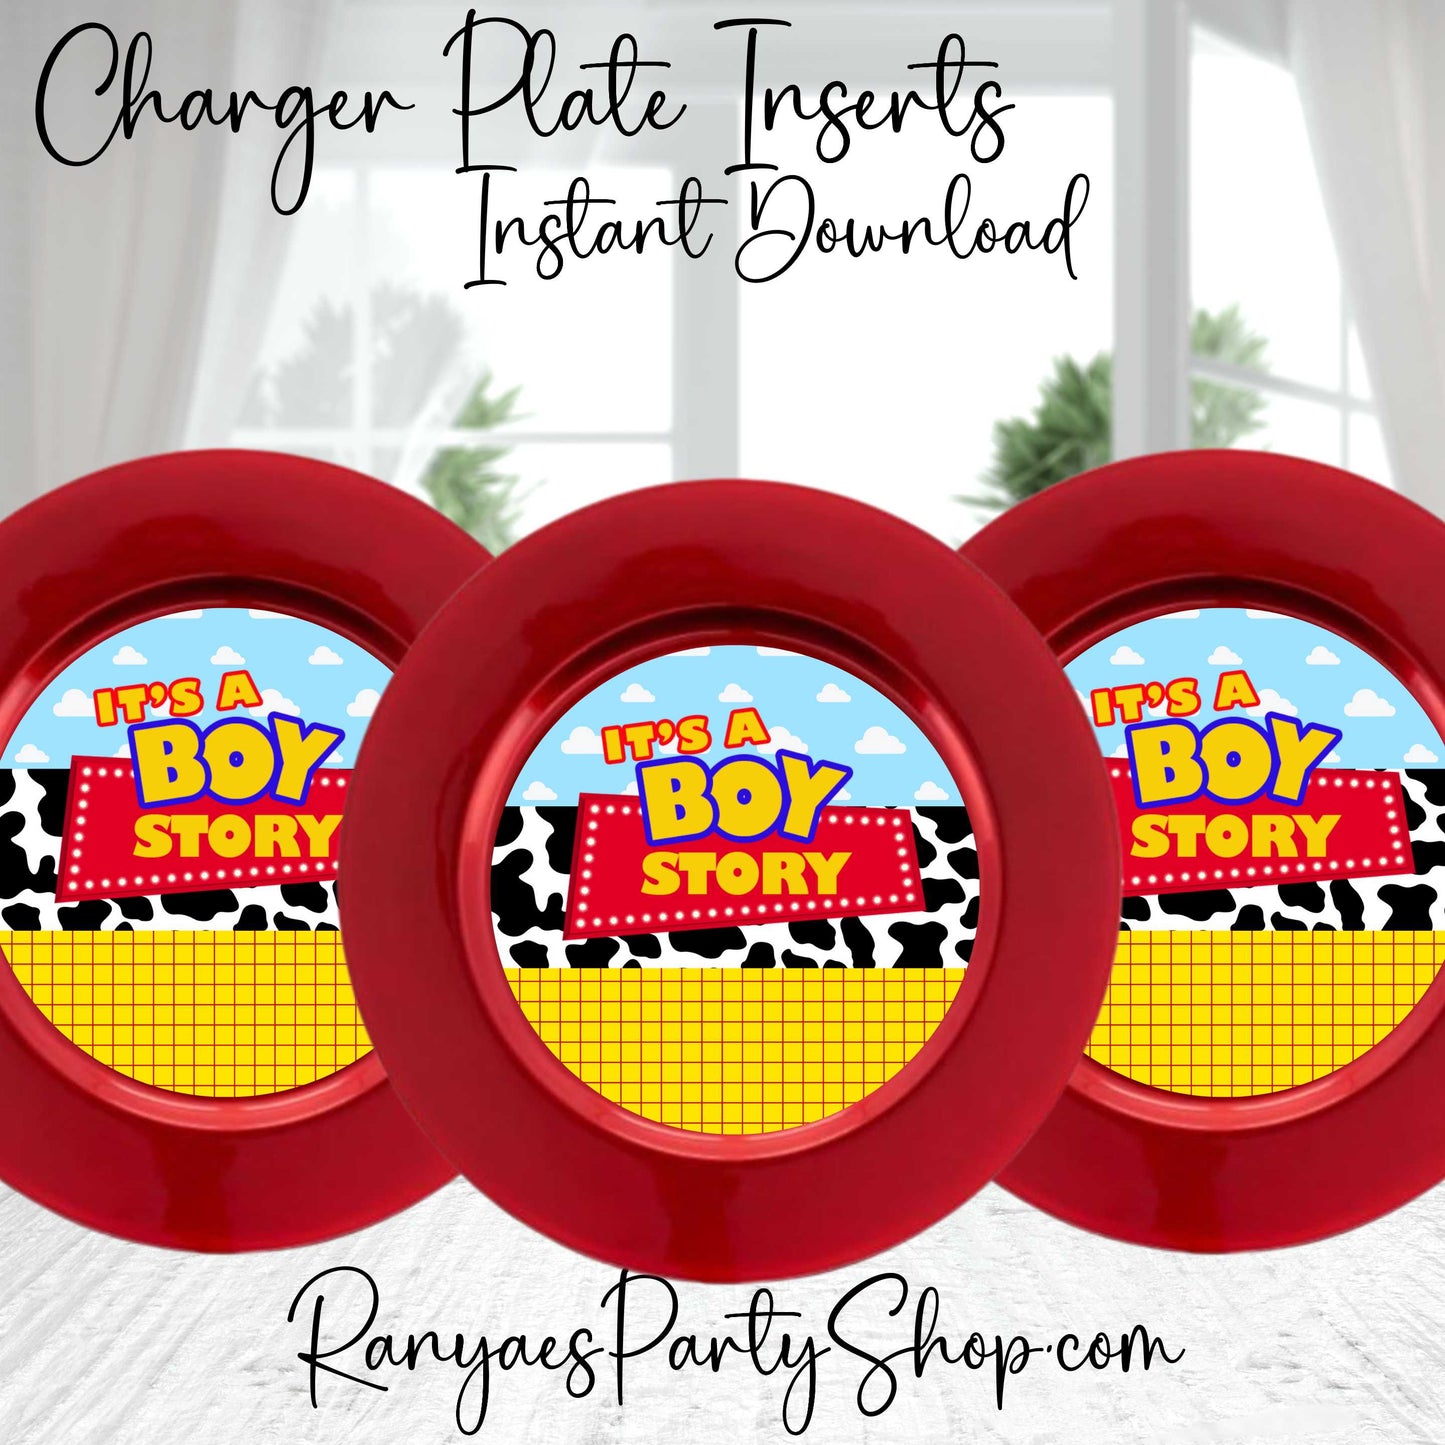 Boy Story 7" inch Charger Plate Insert | Instant Download | Digital Plate Insert | Boy Story Baby Shower